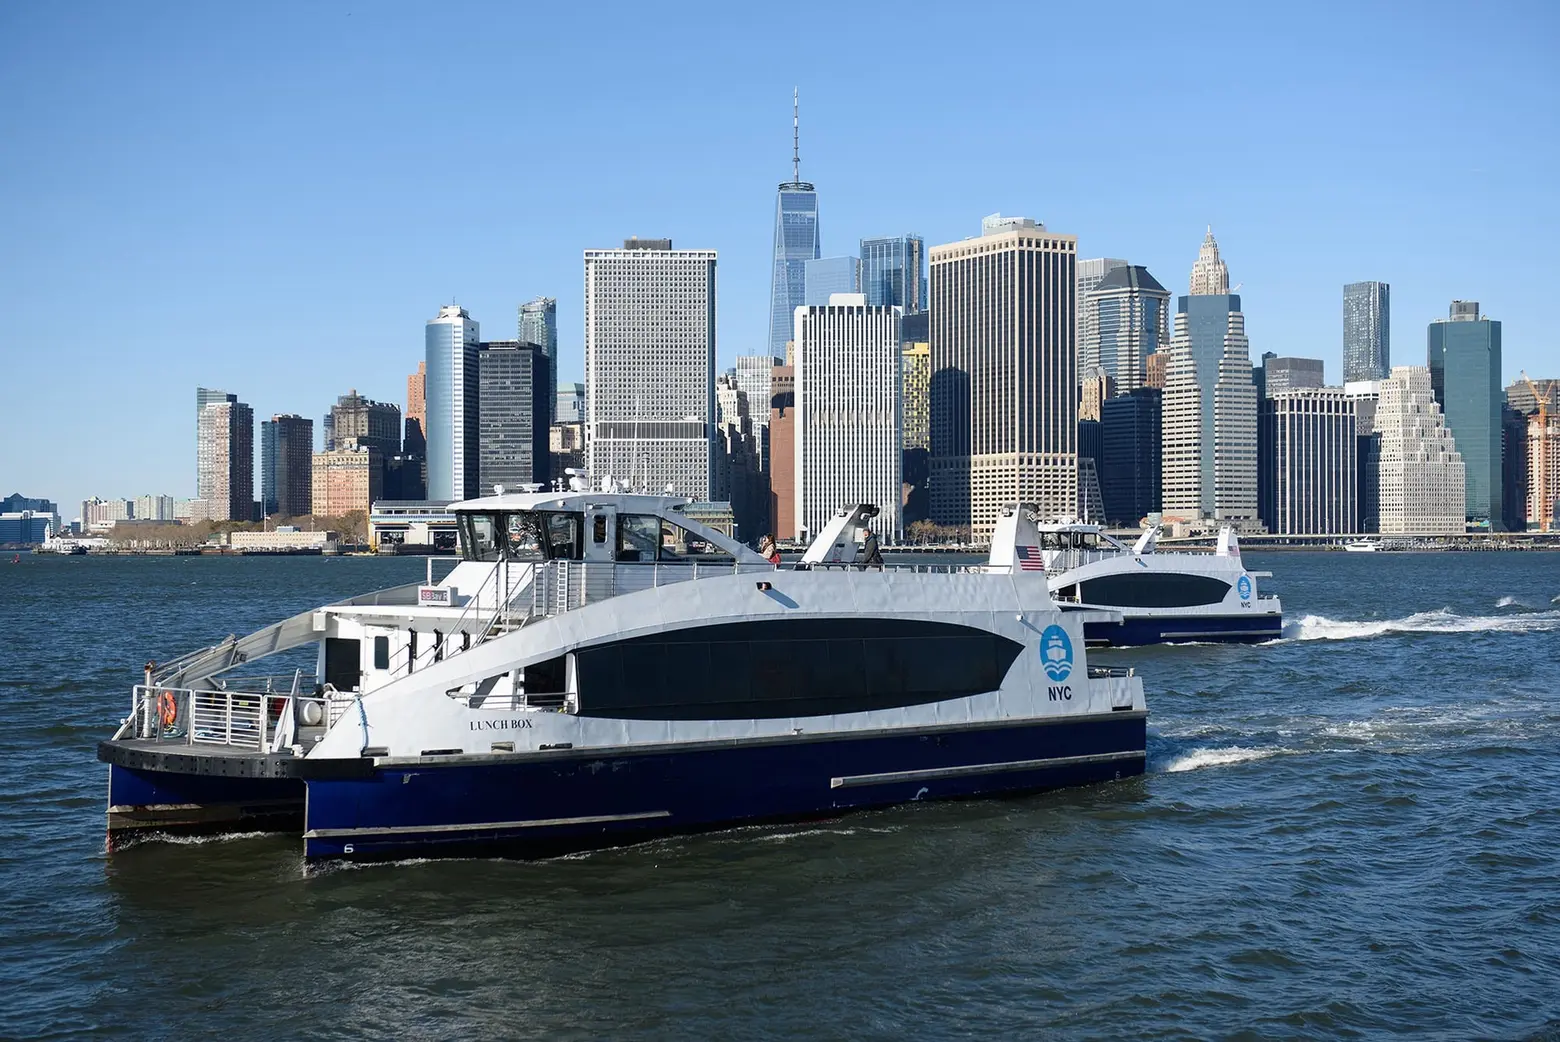 NYC increases ferry fare, but offers discounted rides for low-income New Yorkers